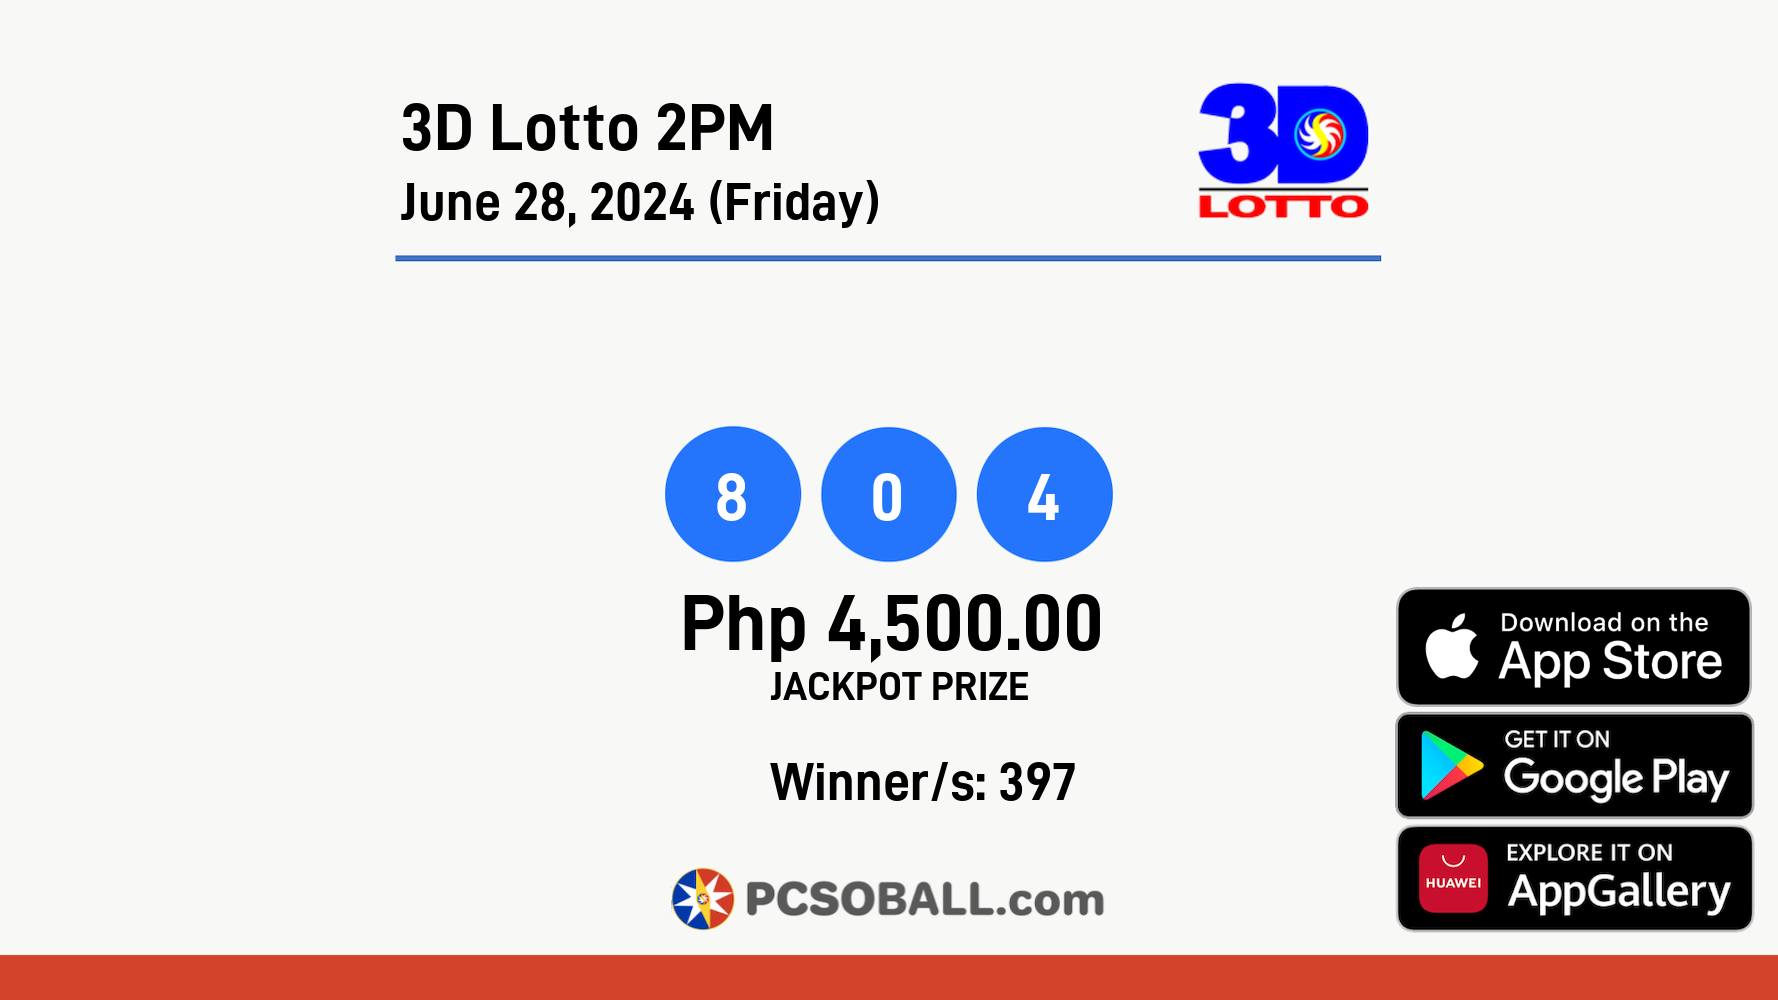 3D Lotto 2PM June 28, 2024 (Friday) Result